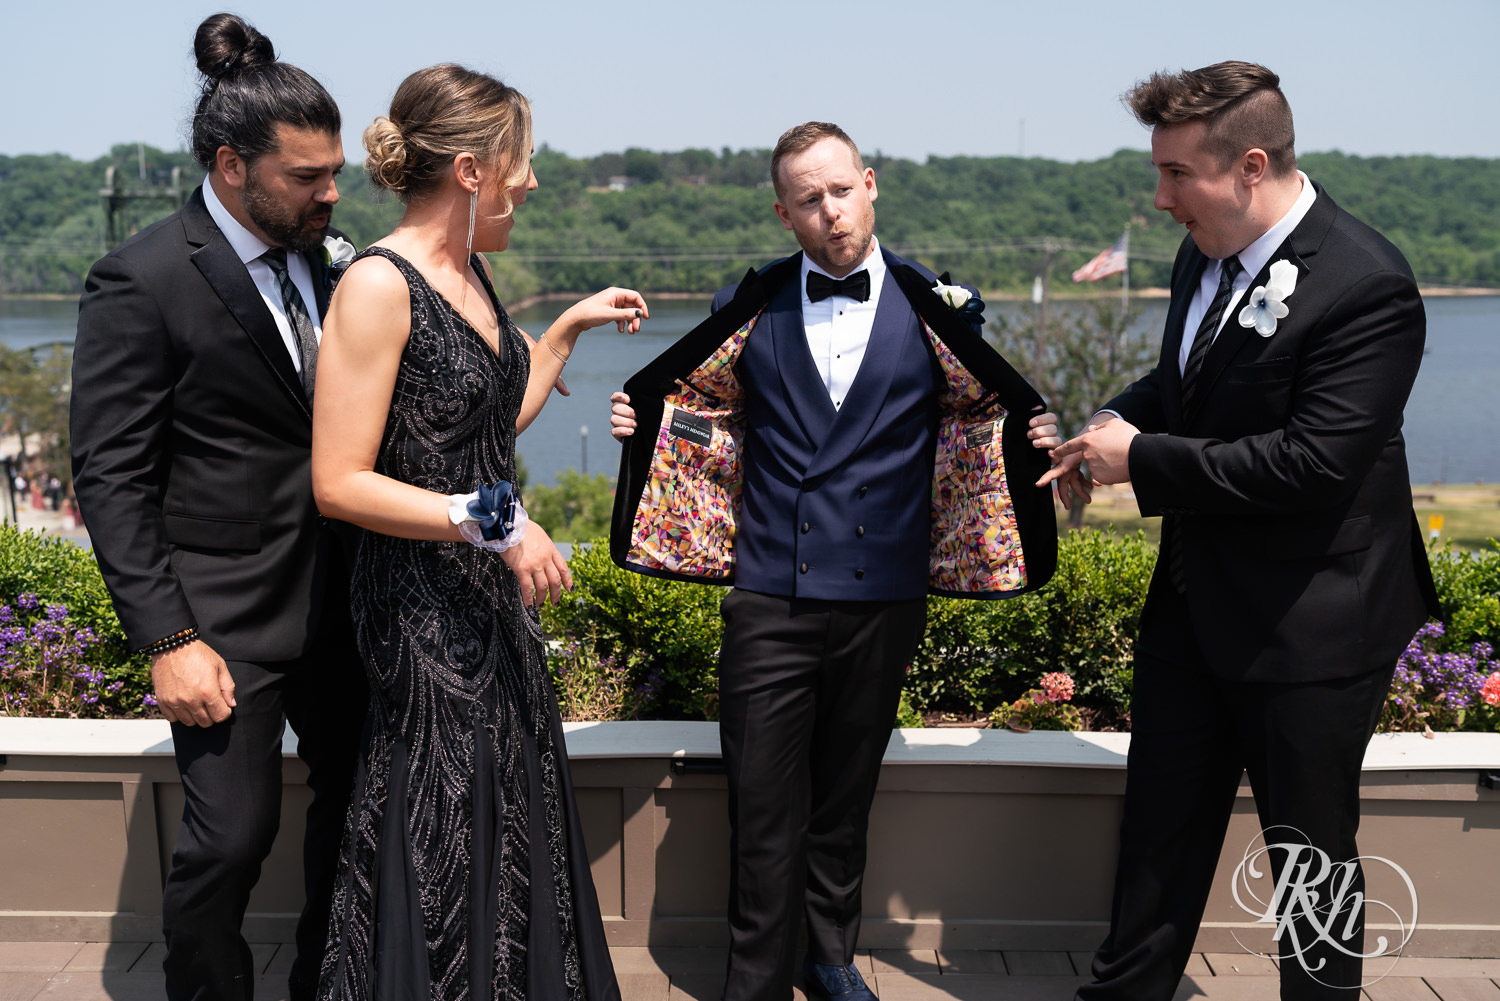 Grooms in blue tuxedos laugh on rooftop with wedding party before gay wedding in Stillwater, Minnesota.